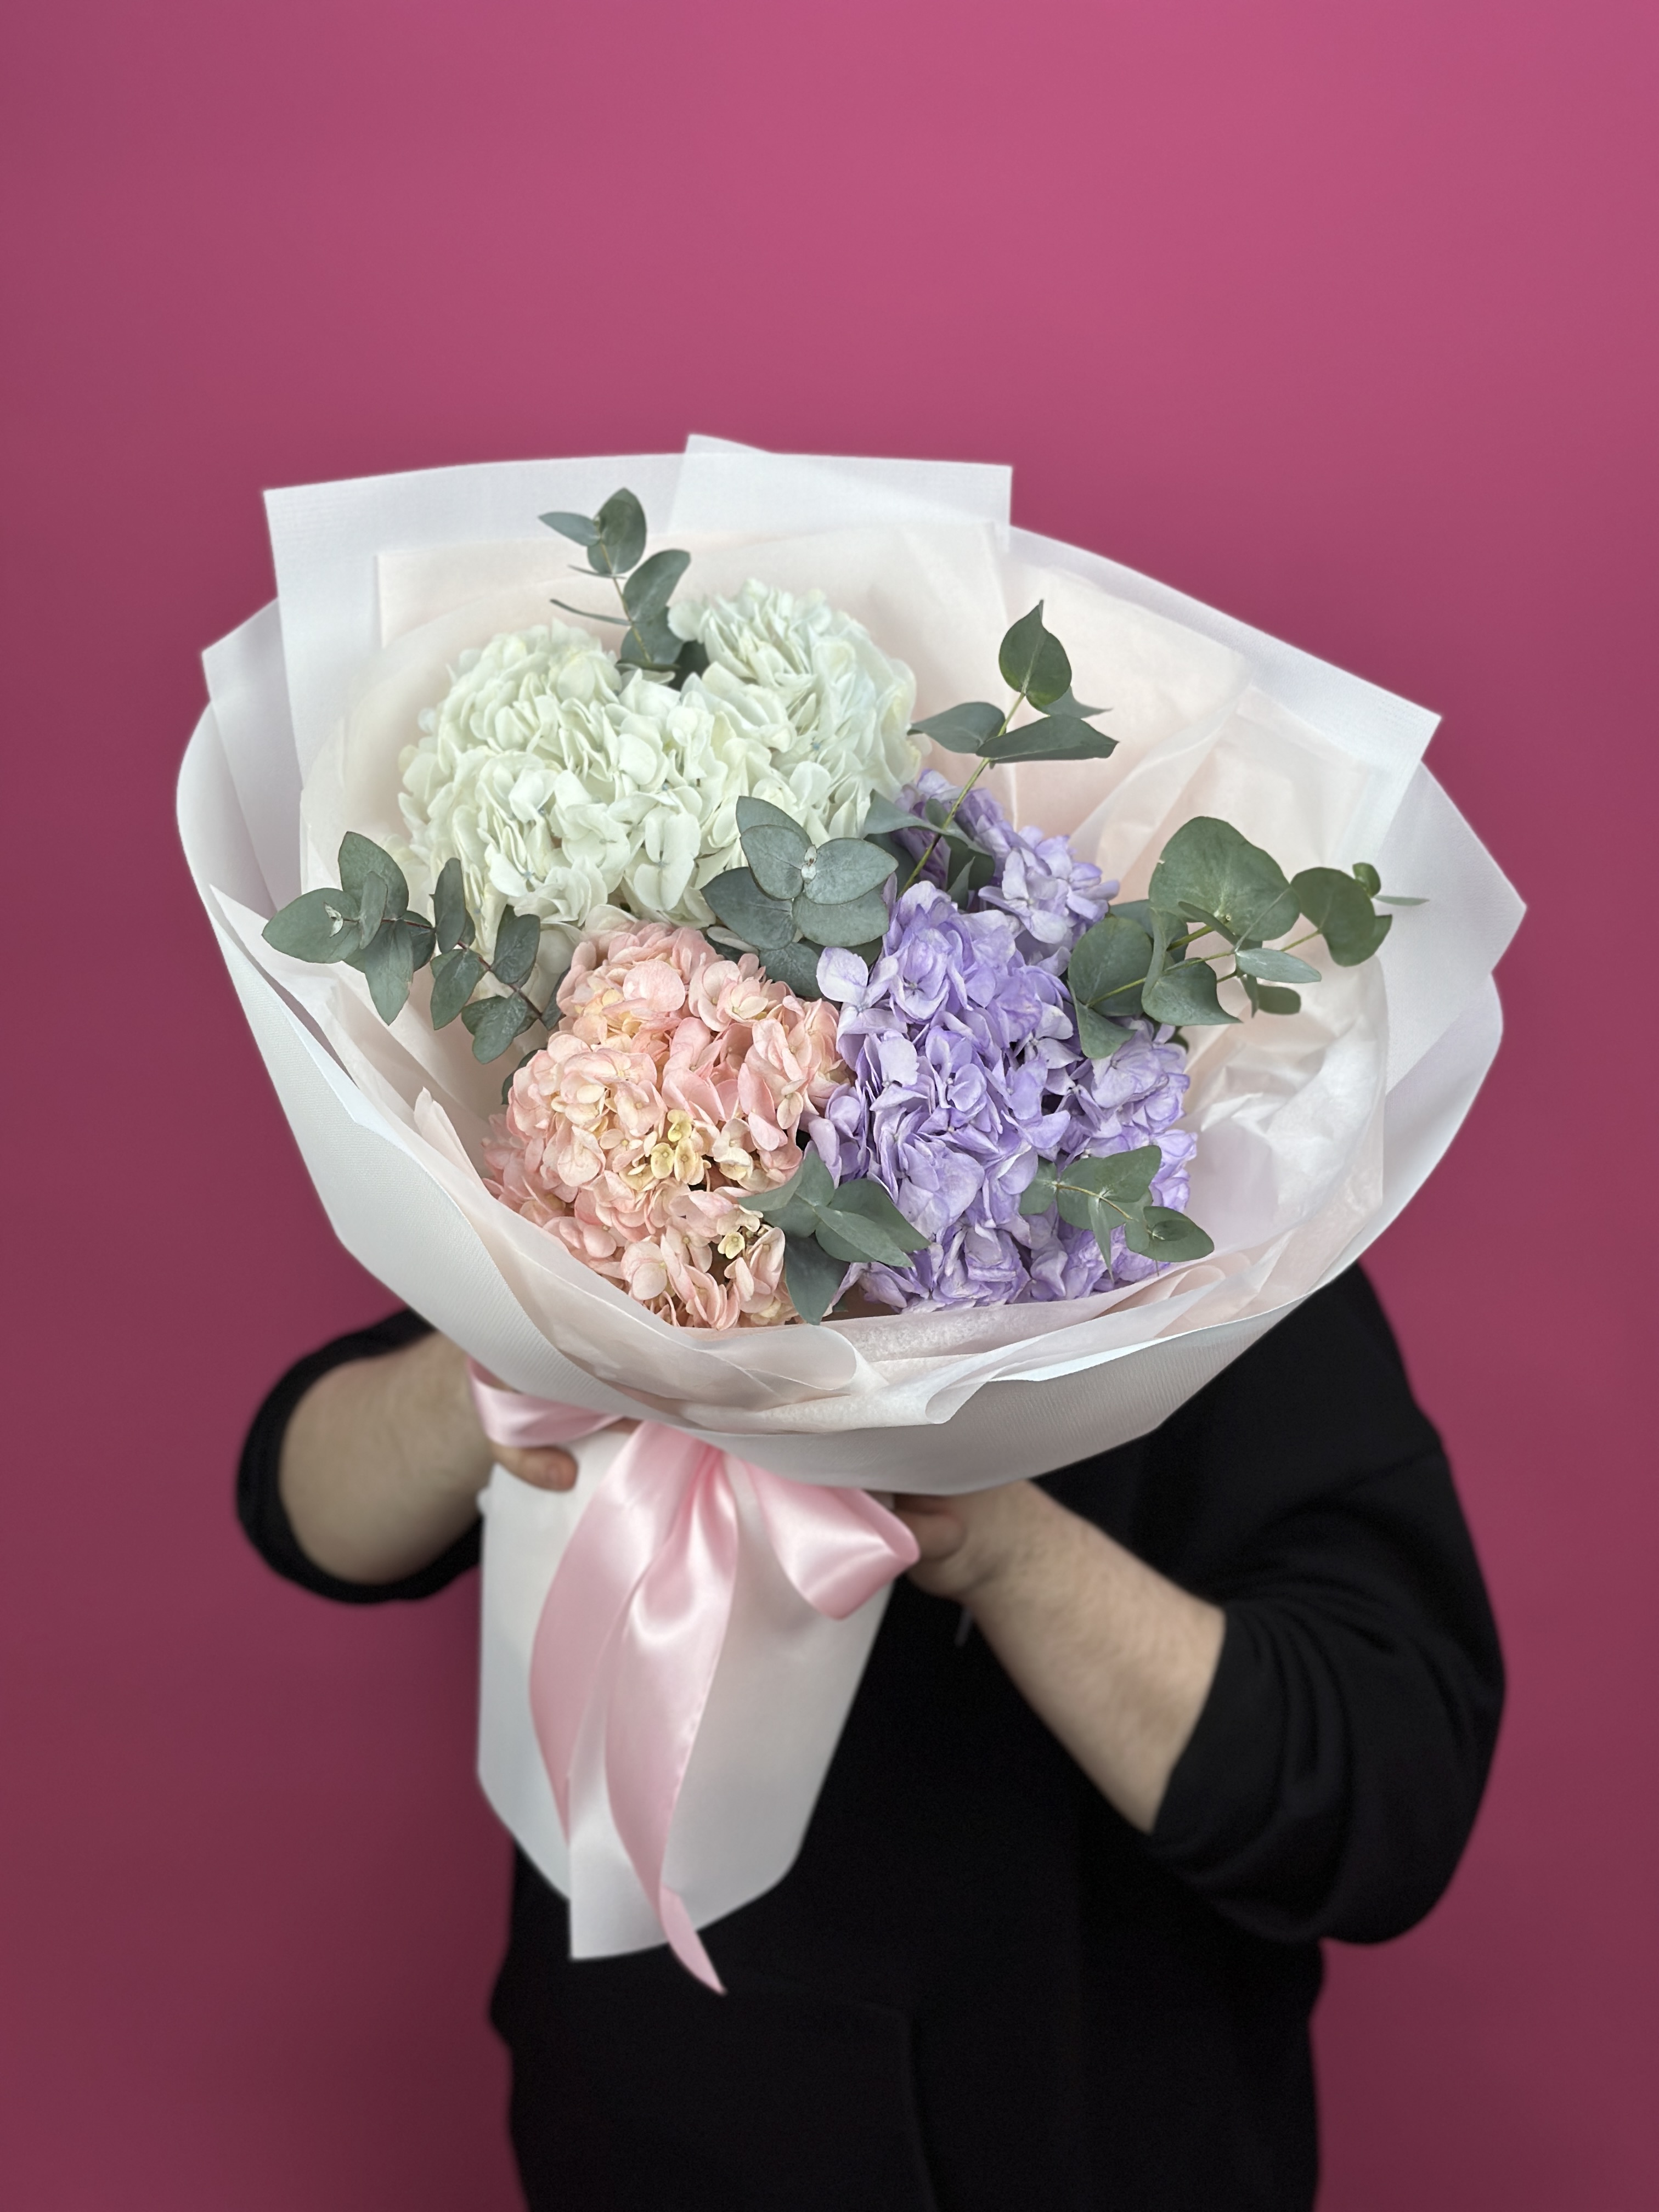 Bouquet of Mono Hydrangeas flowers delivered to Astana